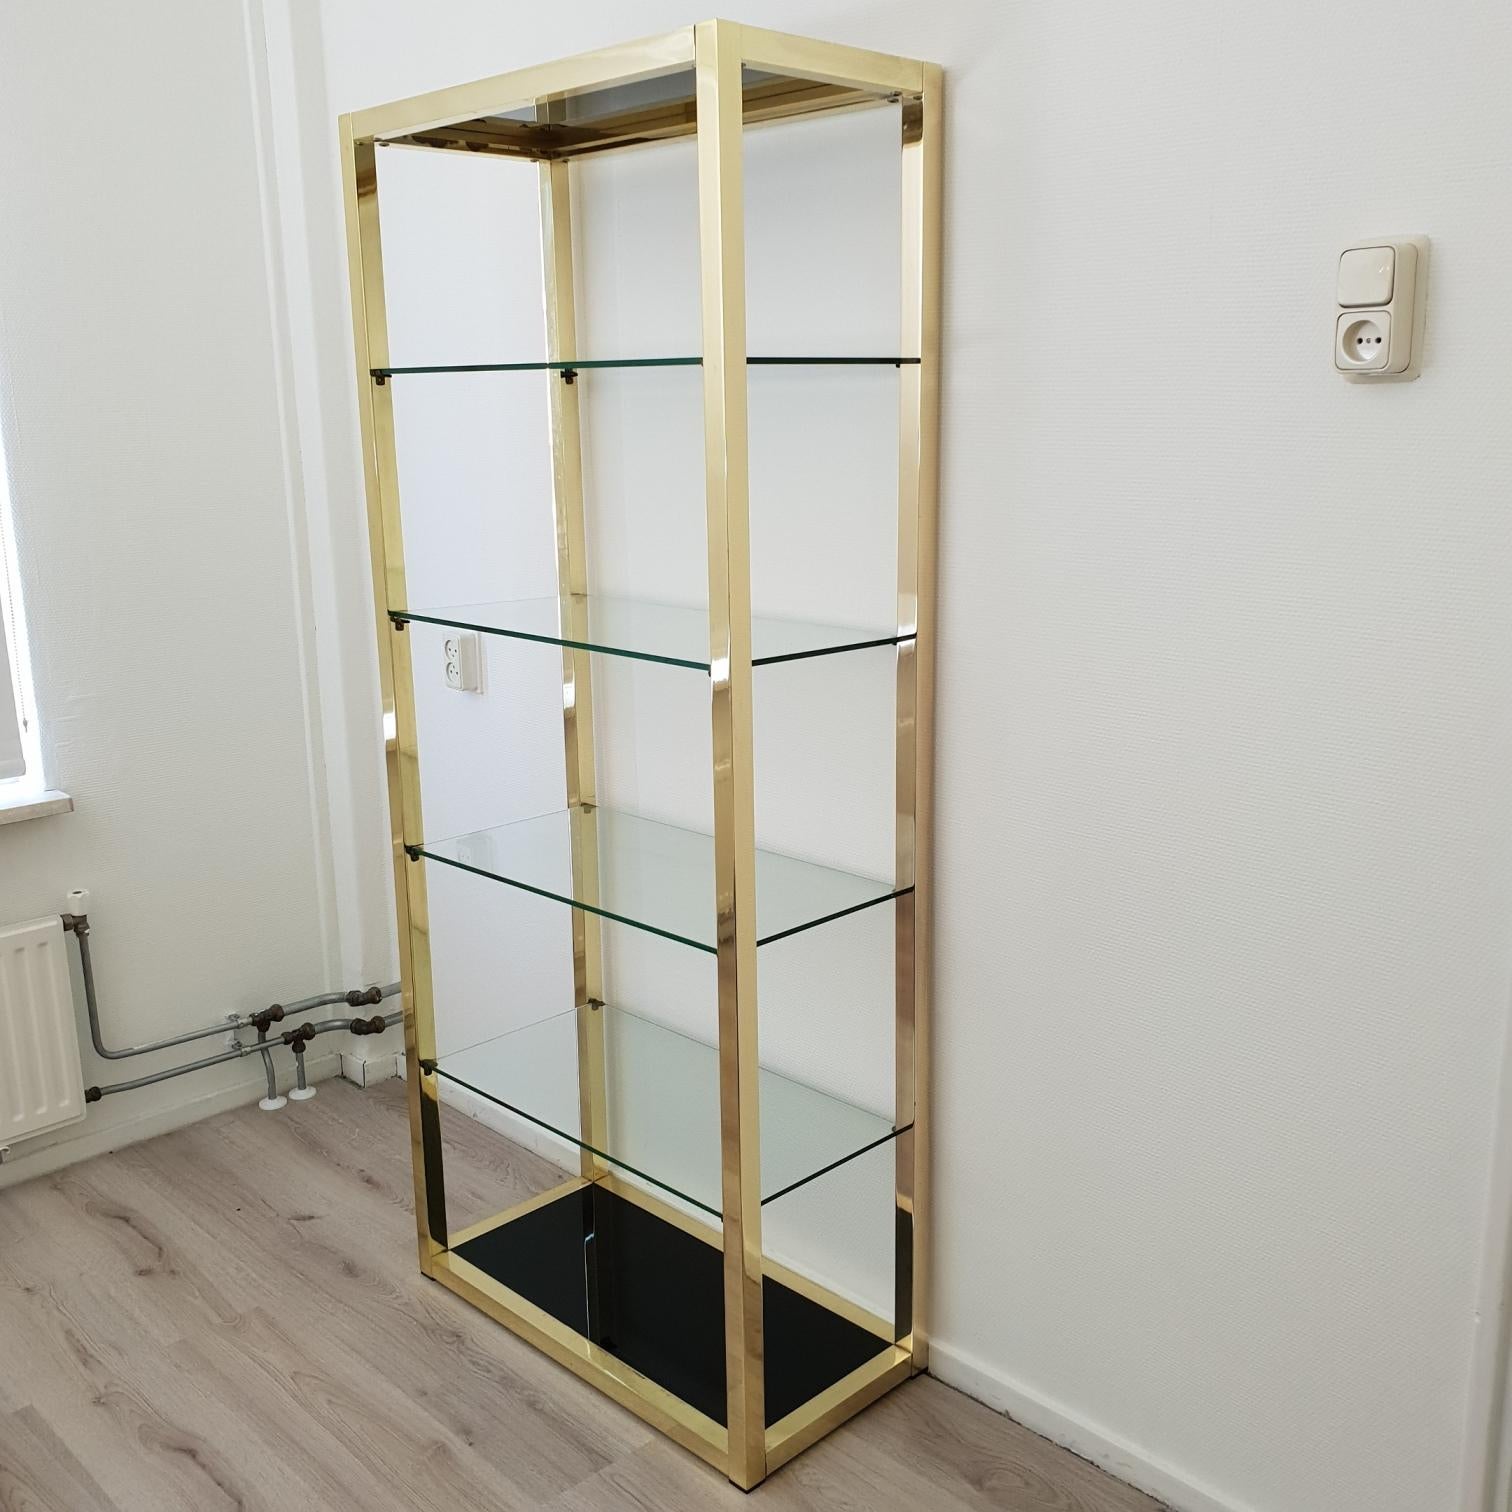 Hollywood Regency Italian Mid-Century Modern Gold Plated Shelving Unit Étagère, 1970s For Sale